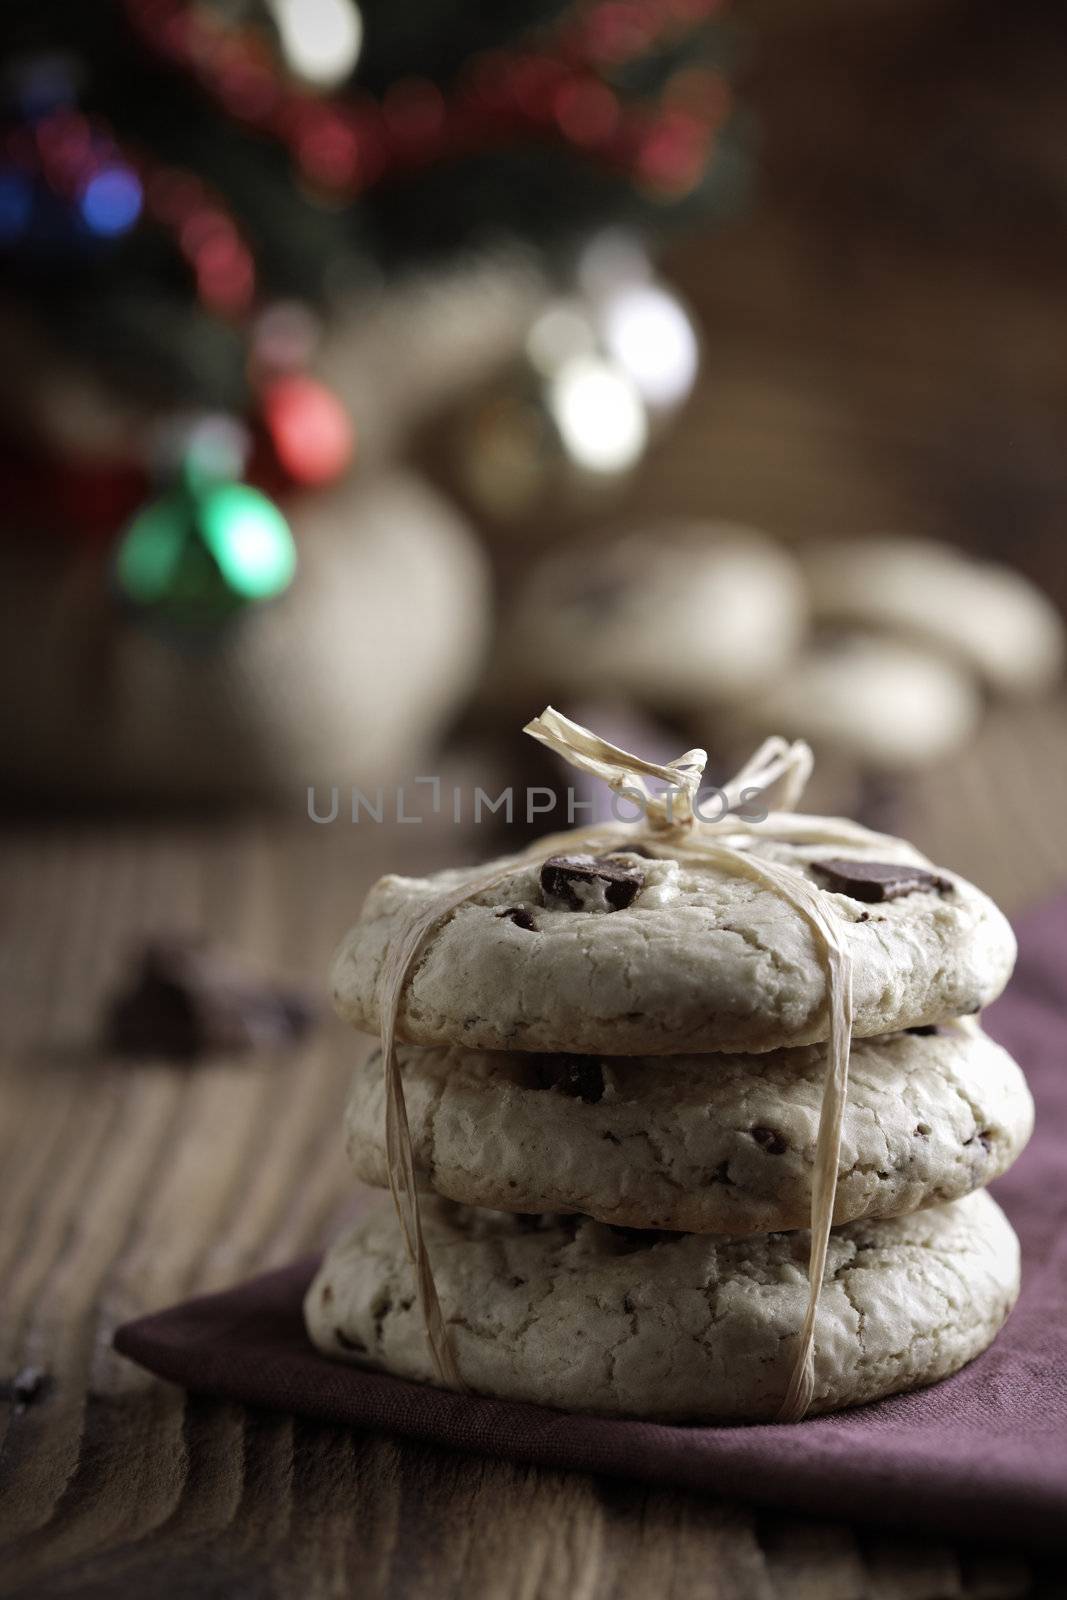 Chocolate chip cookies with christmas tree by stokkete